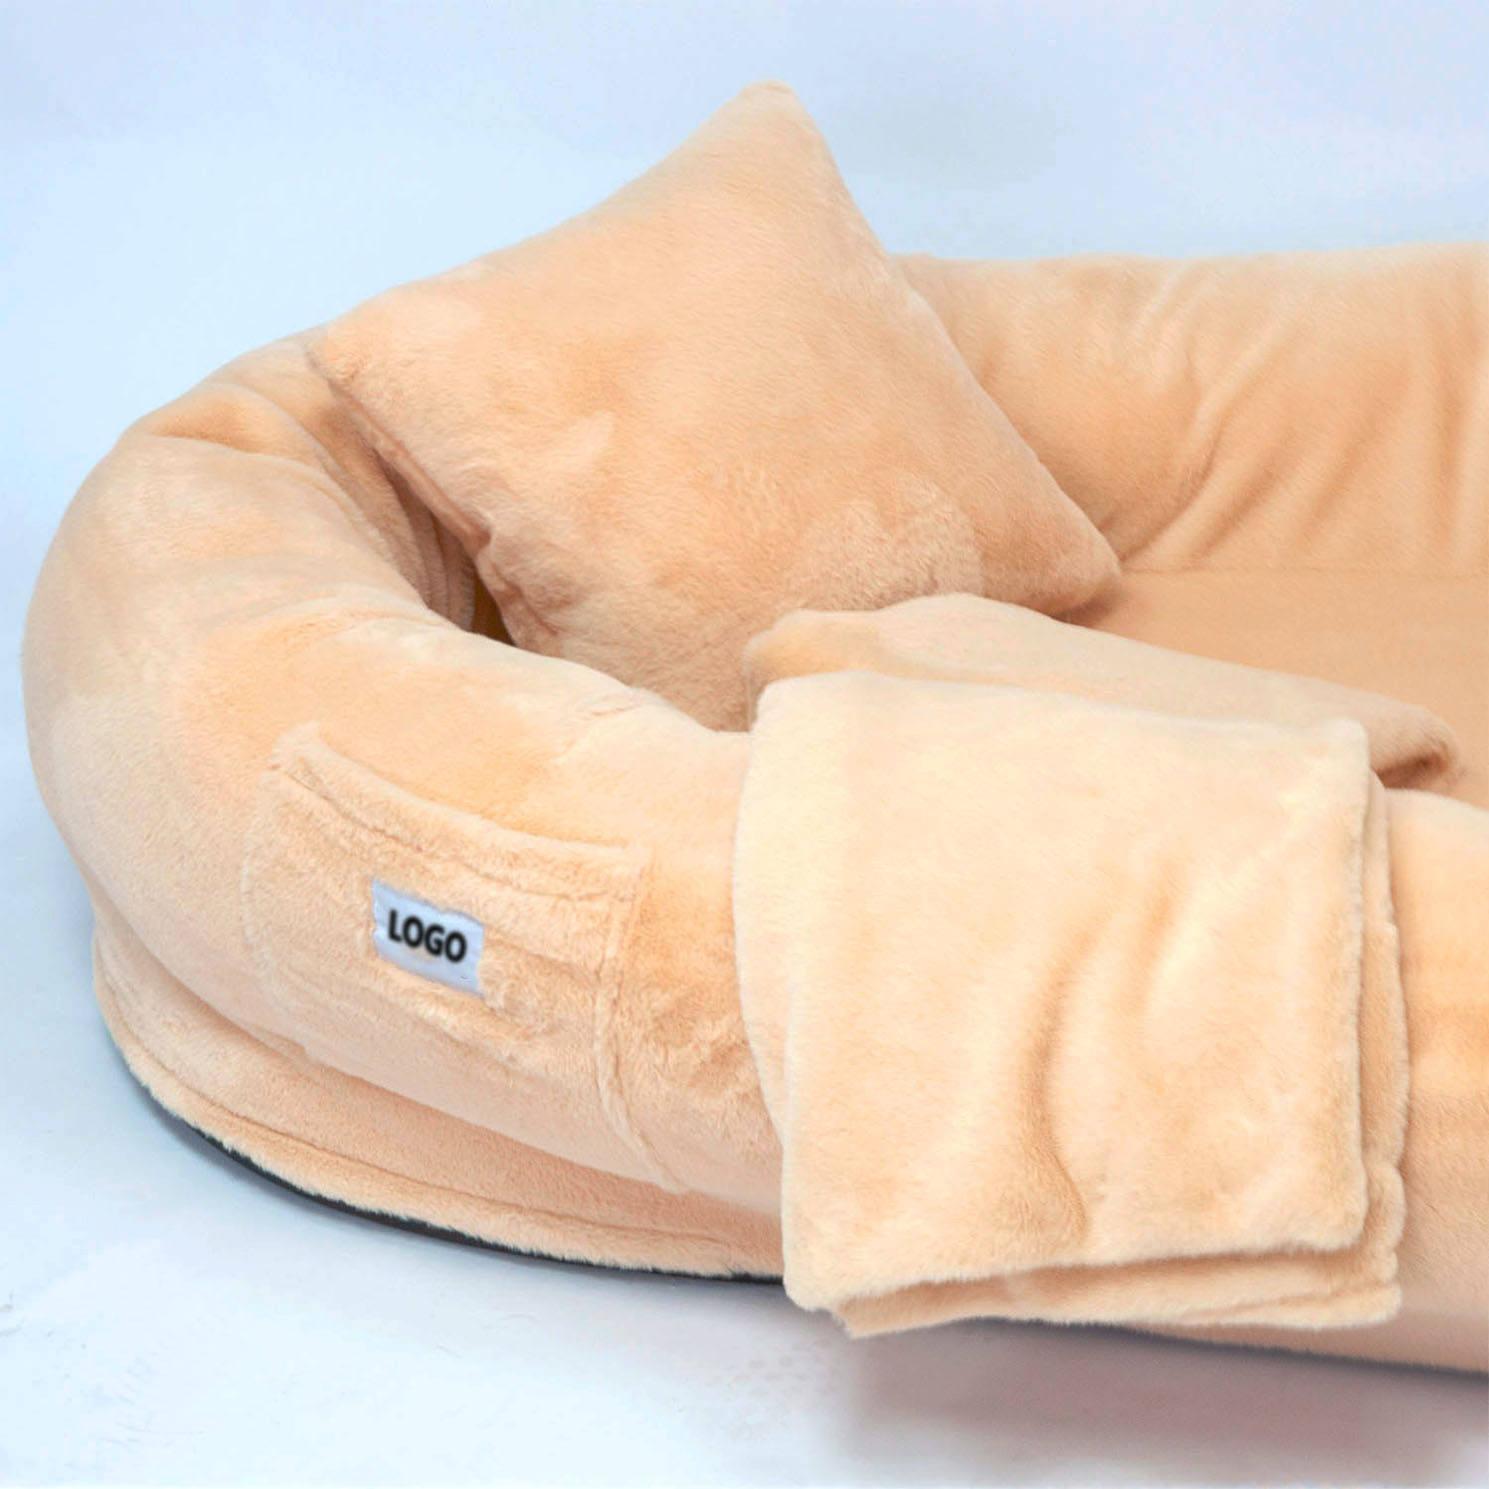 Dog Bed For Human Human Large Dog Bed Giant Dog Bed For Humans